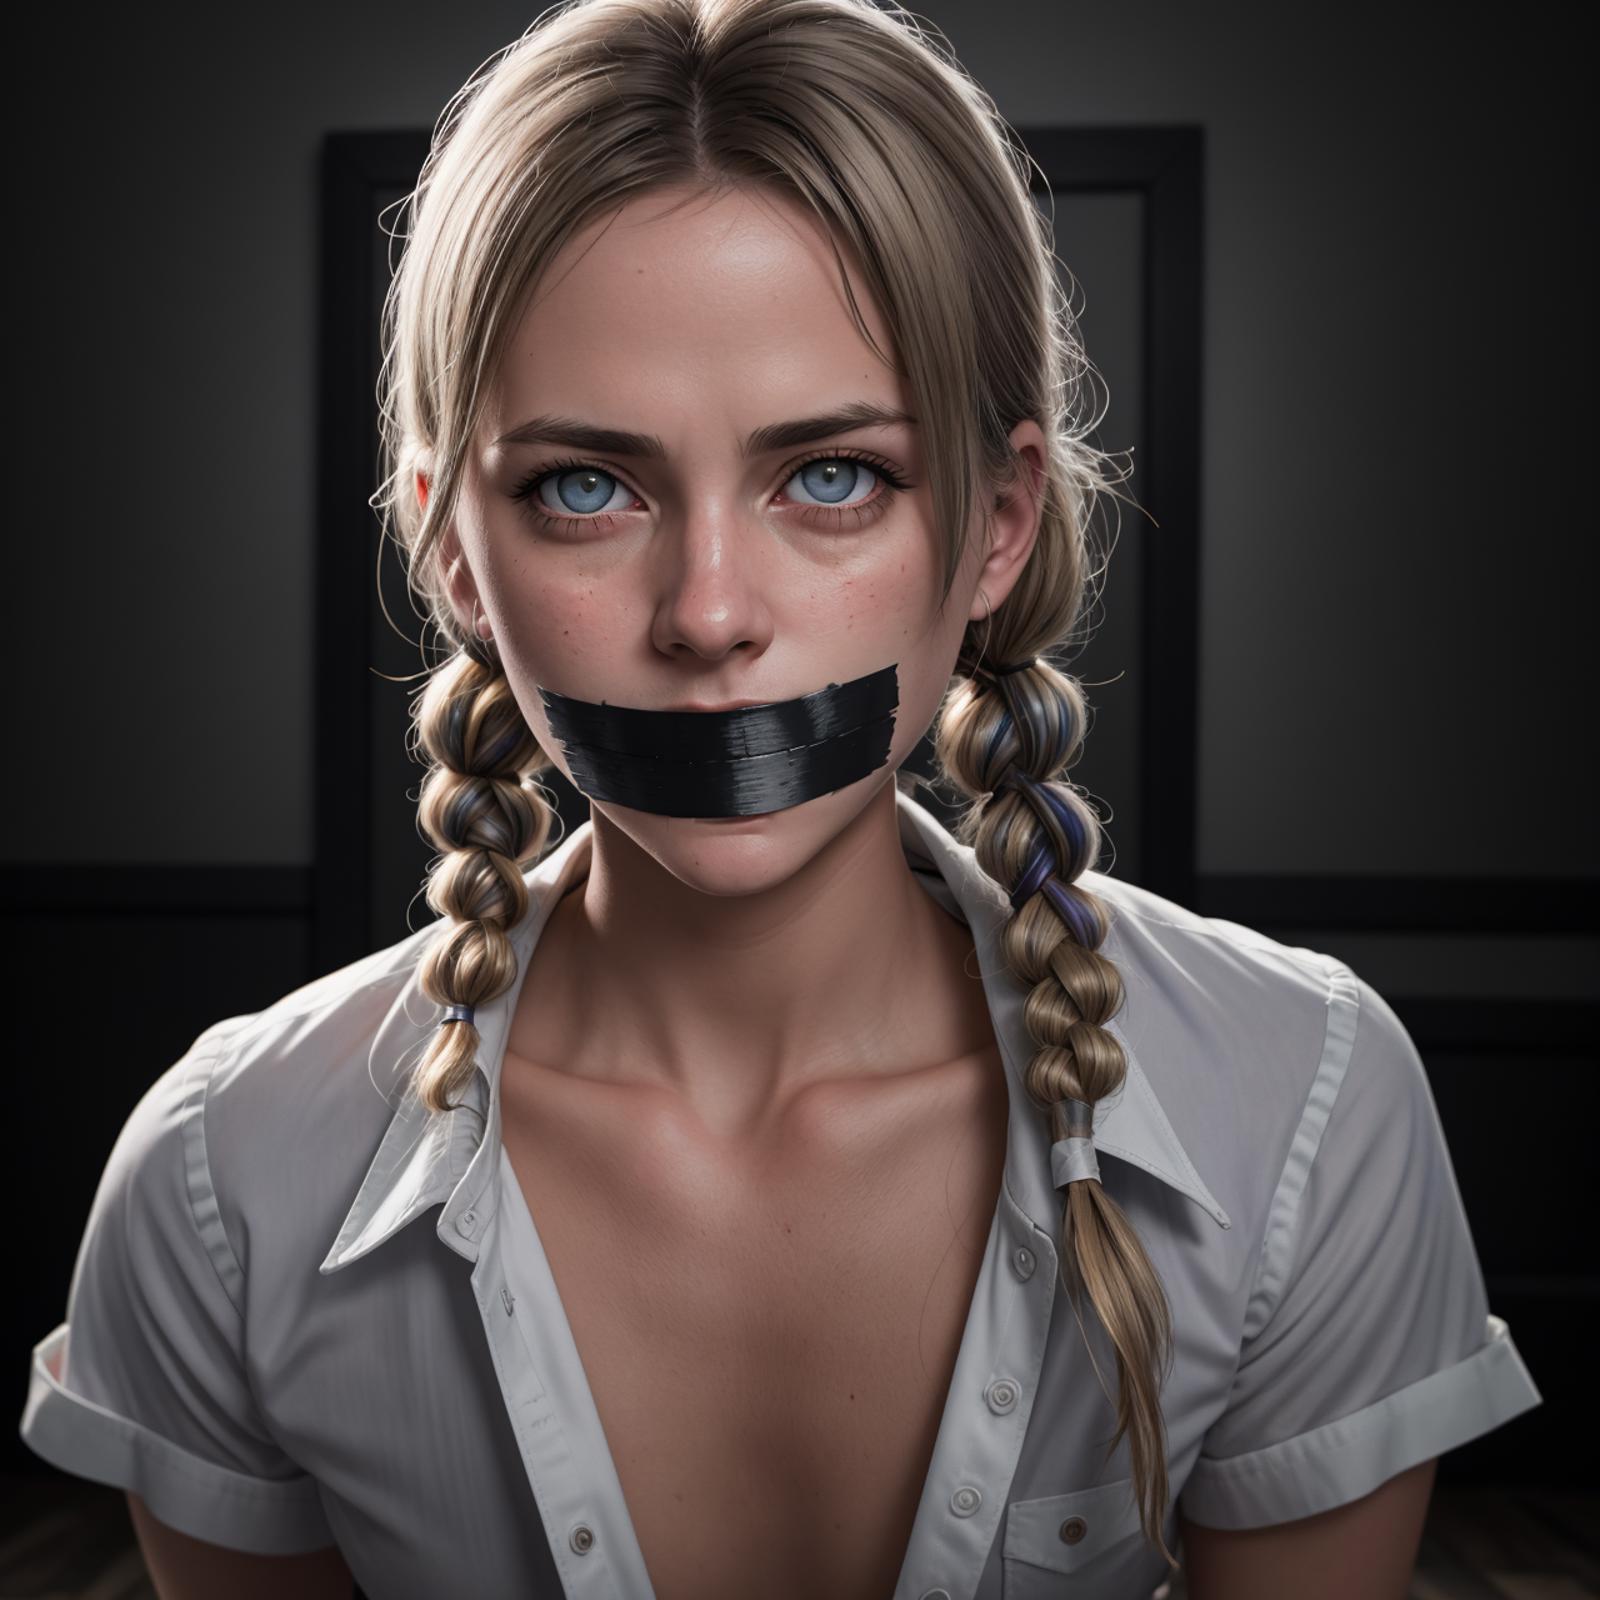 Girl with blonde braids and a black tape on her mouth.